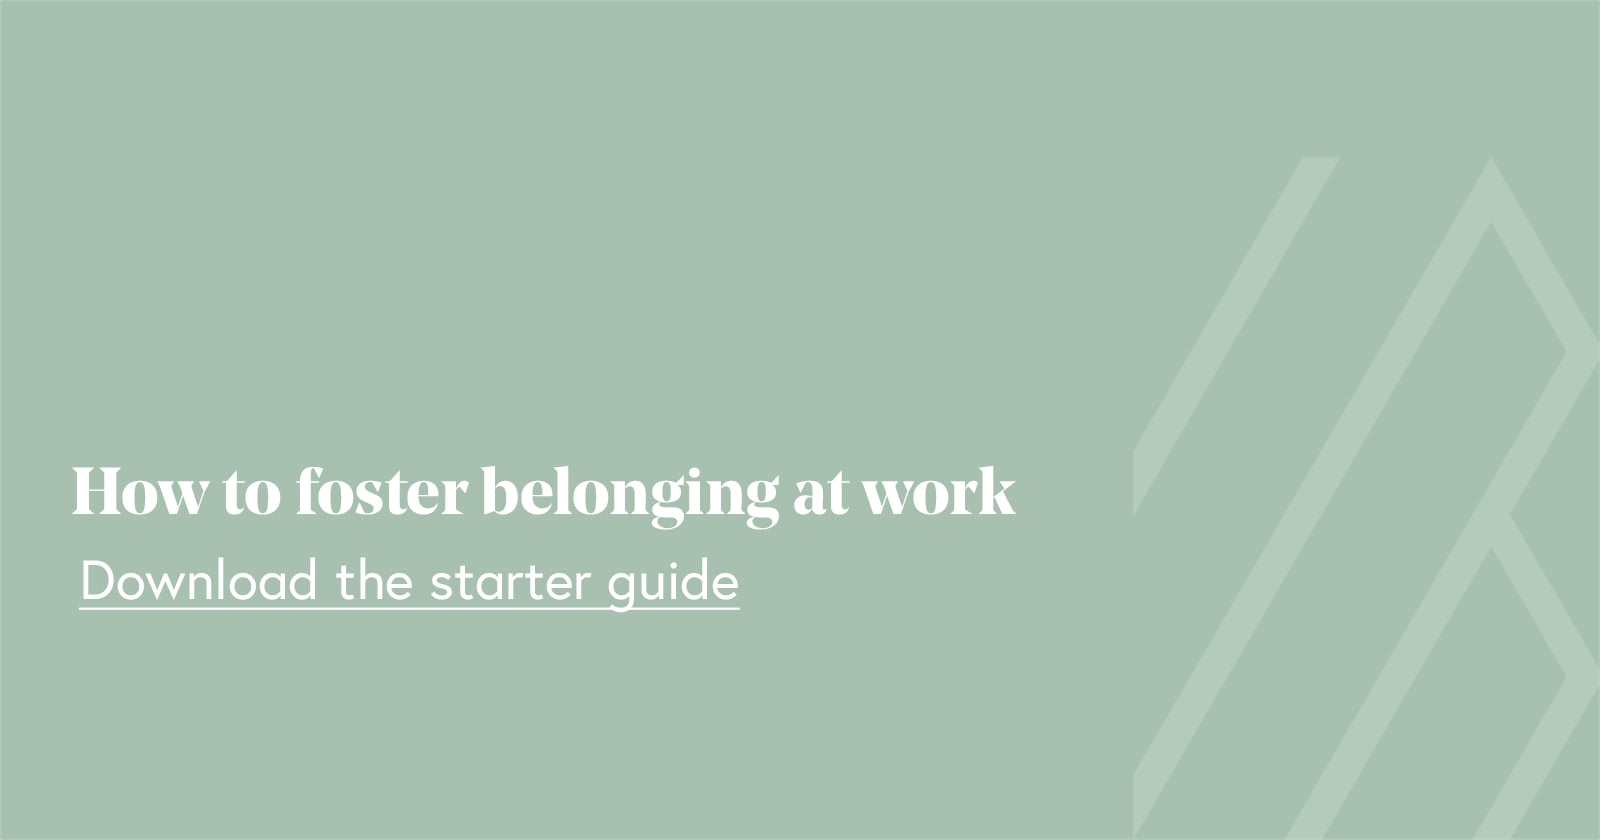 How to foster belonging at work